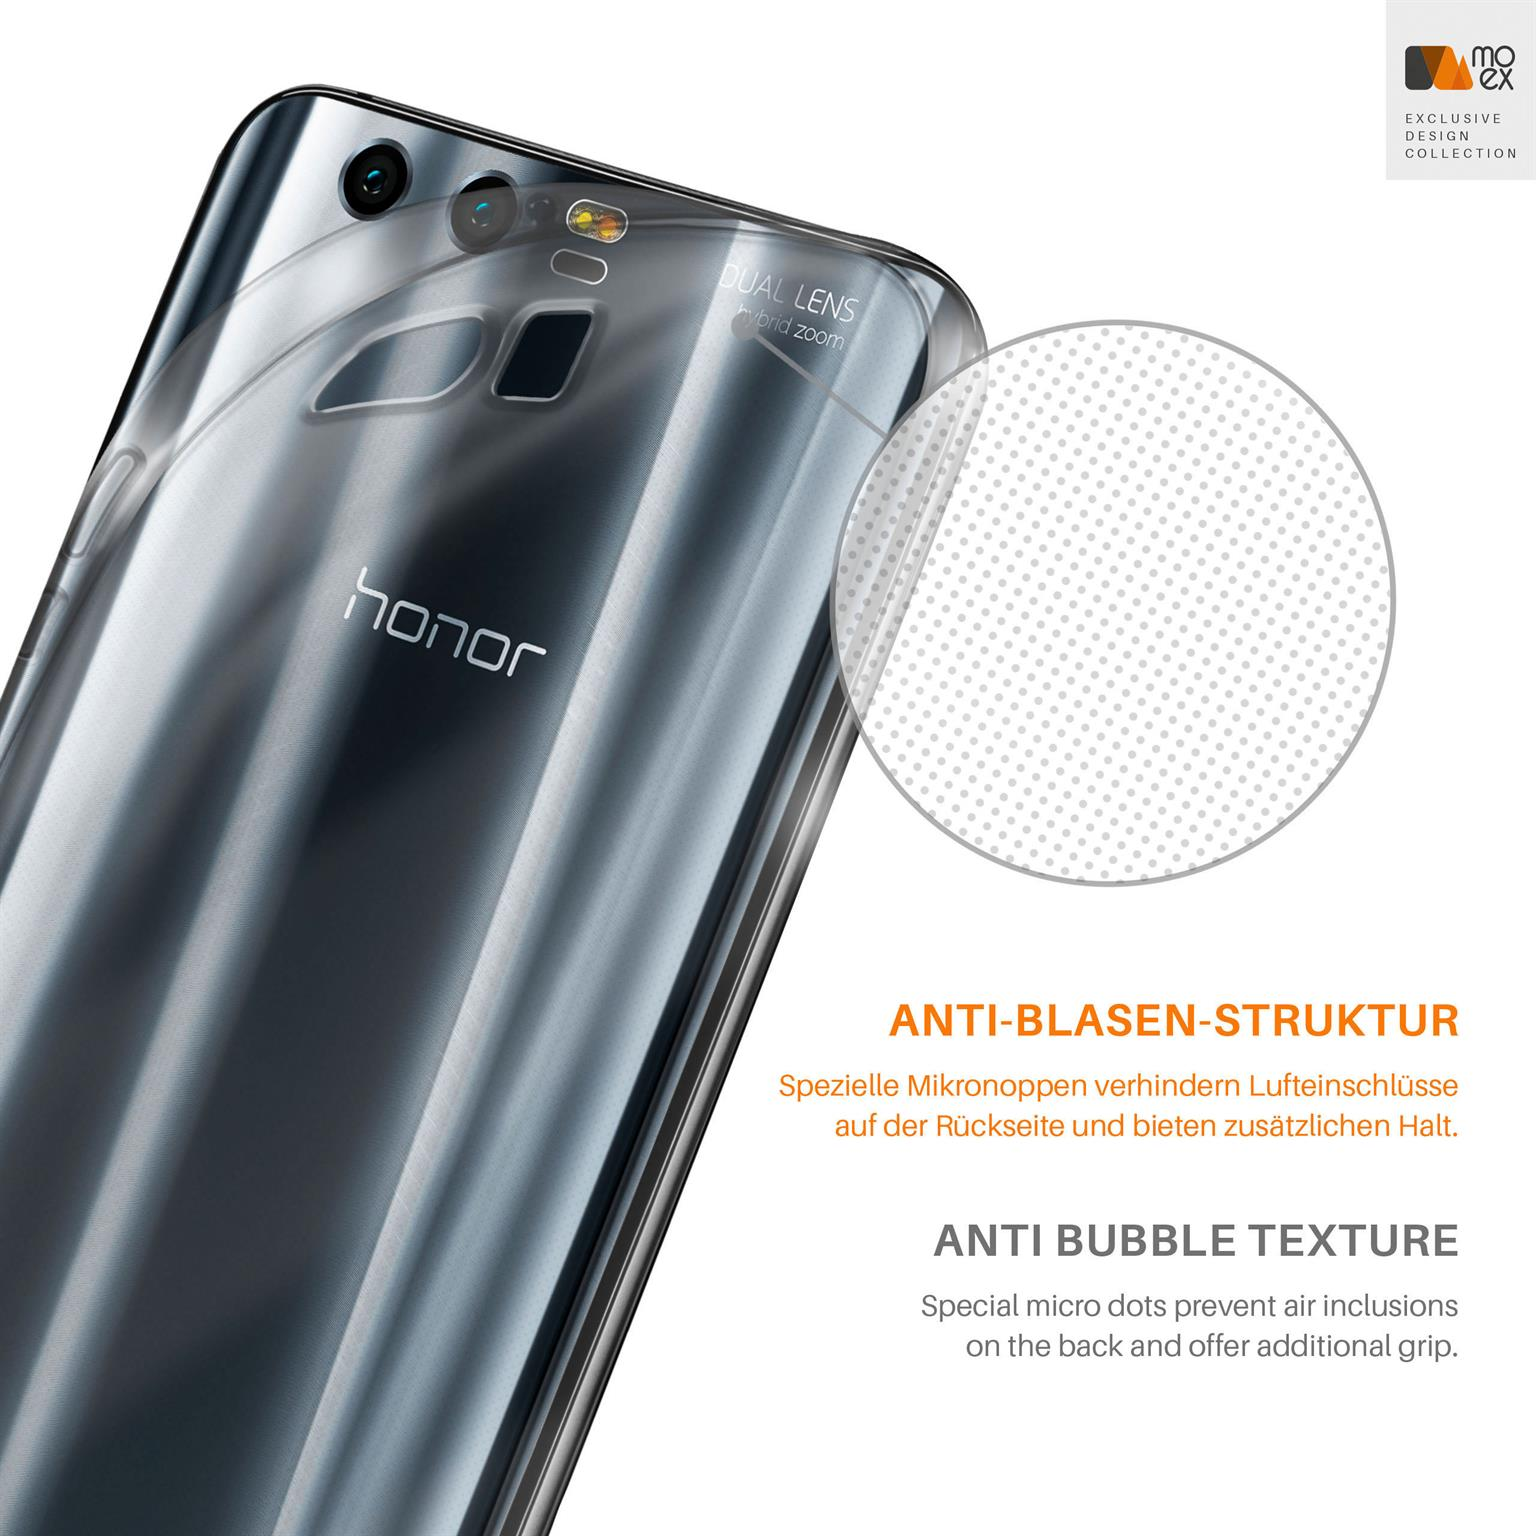 MOEX Aero Case, Backcover, Huawei, Crystal-Clear Honor 9